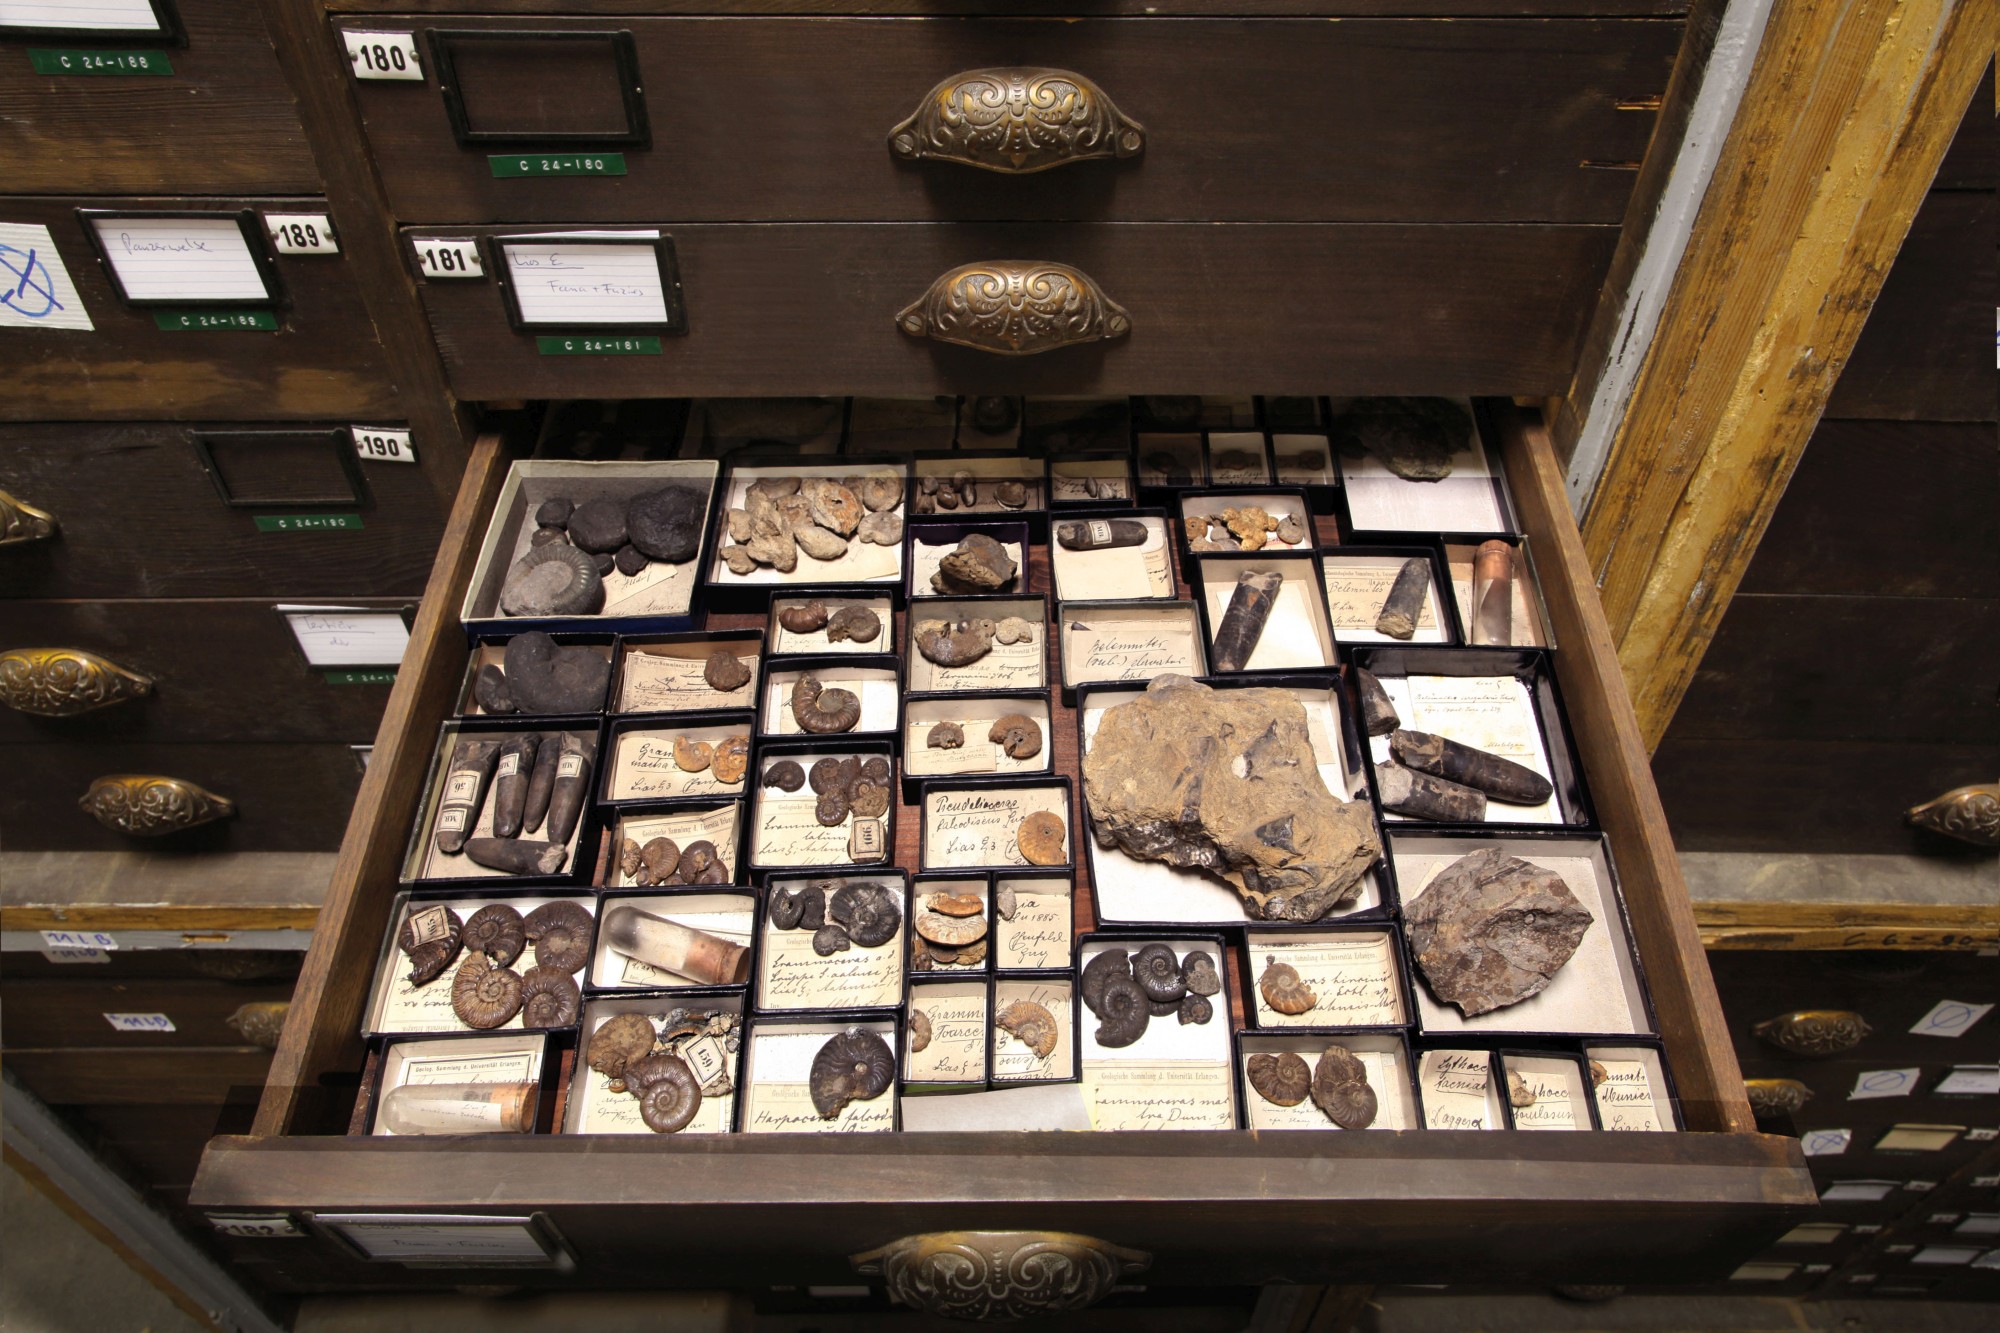 Ammonites and belemnites in the historical part of the Geological Collection (Image: Georg Pöhlein)